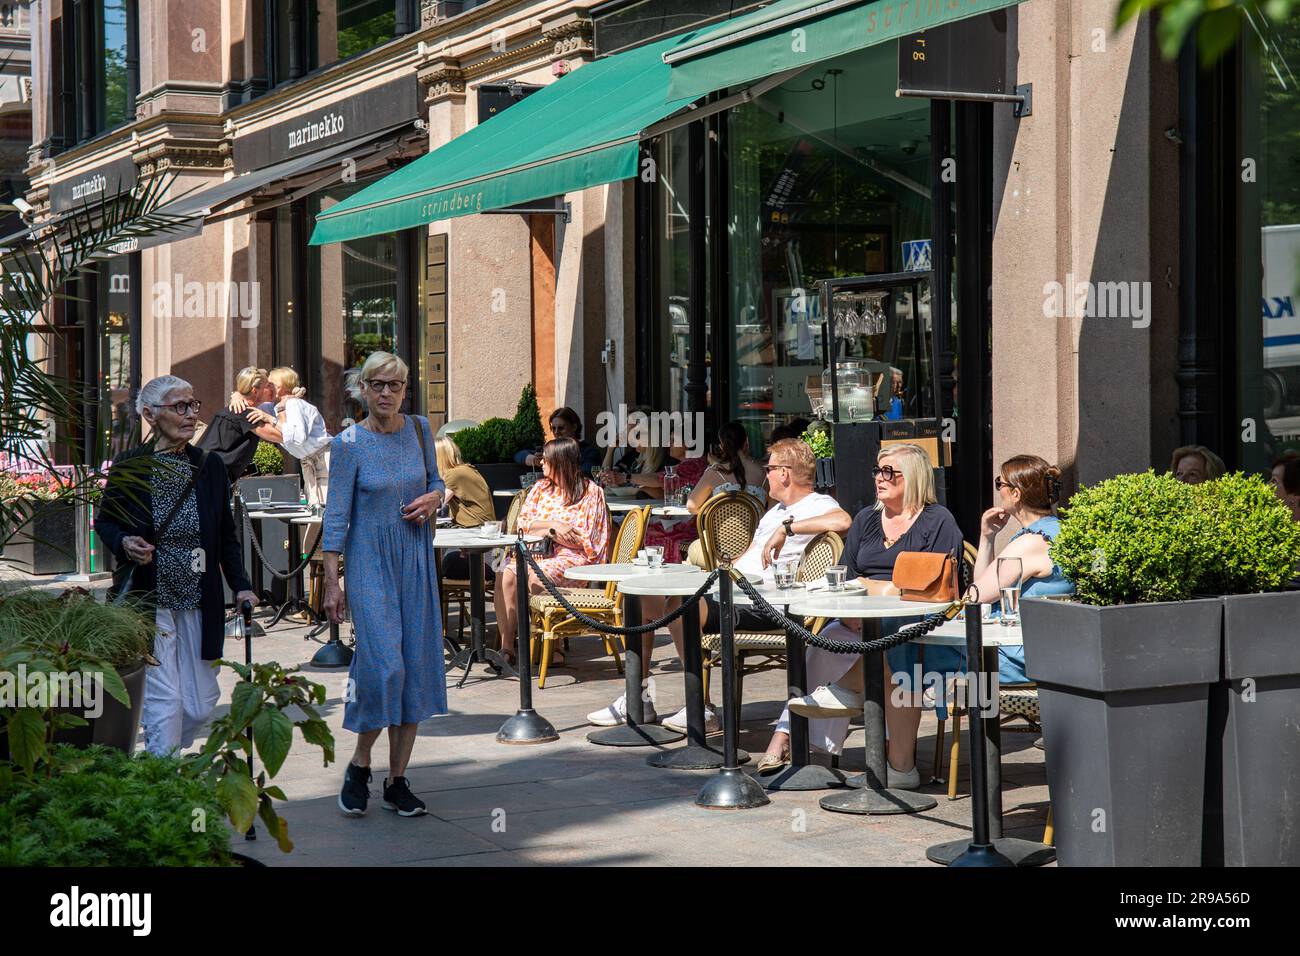 Cafe customers and passers-by at Pohjoisesplanadi in Helsinki, Finland Stock Photo